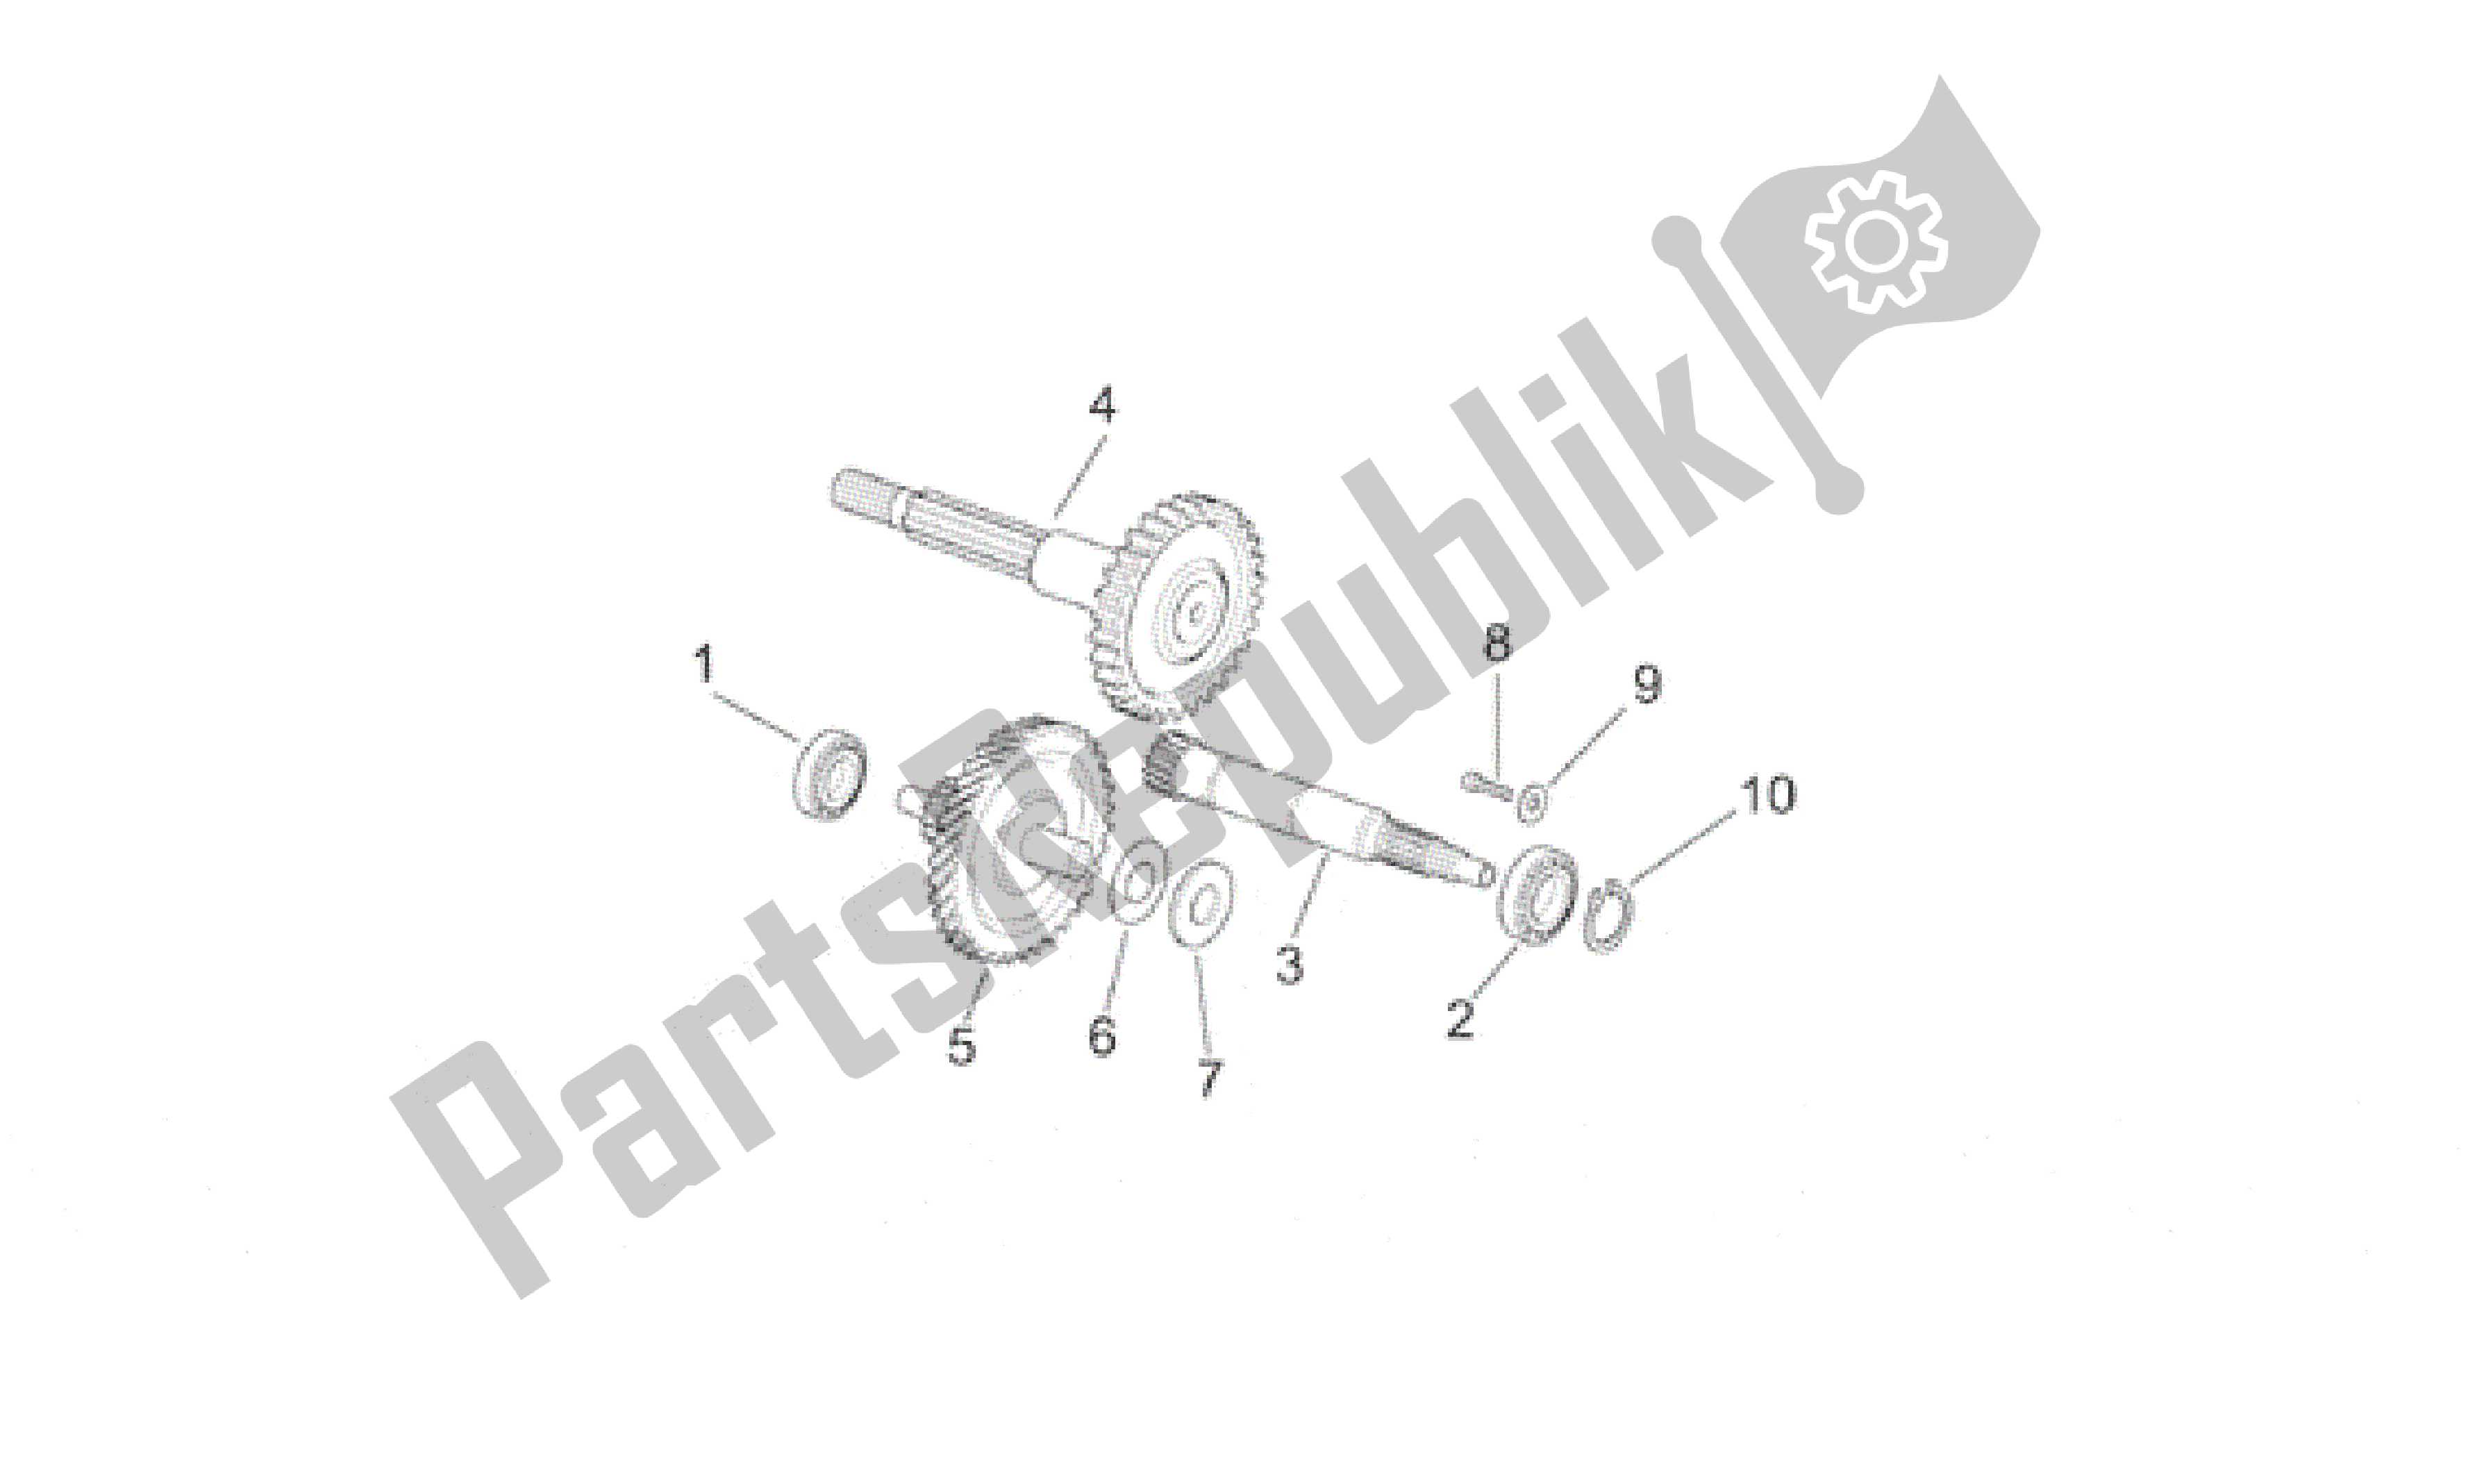 All parts for the Transmission Final Drive of the Aprilia Sonic 50 1998 - 2001